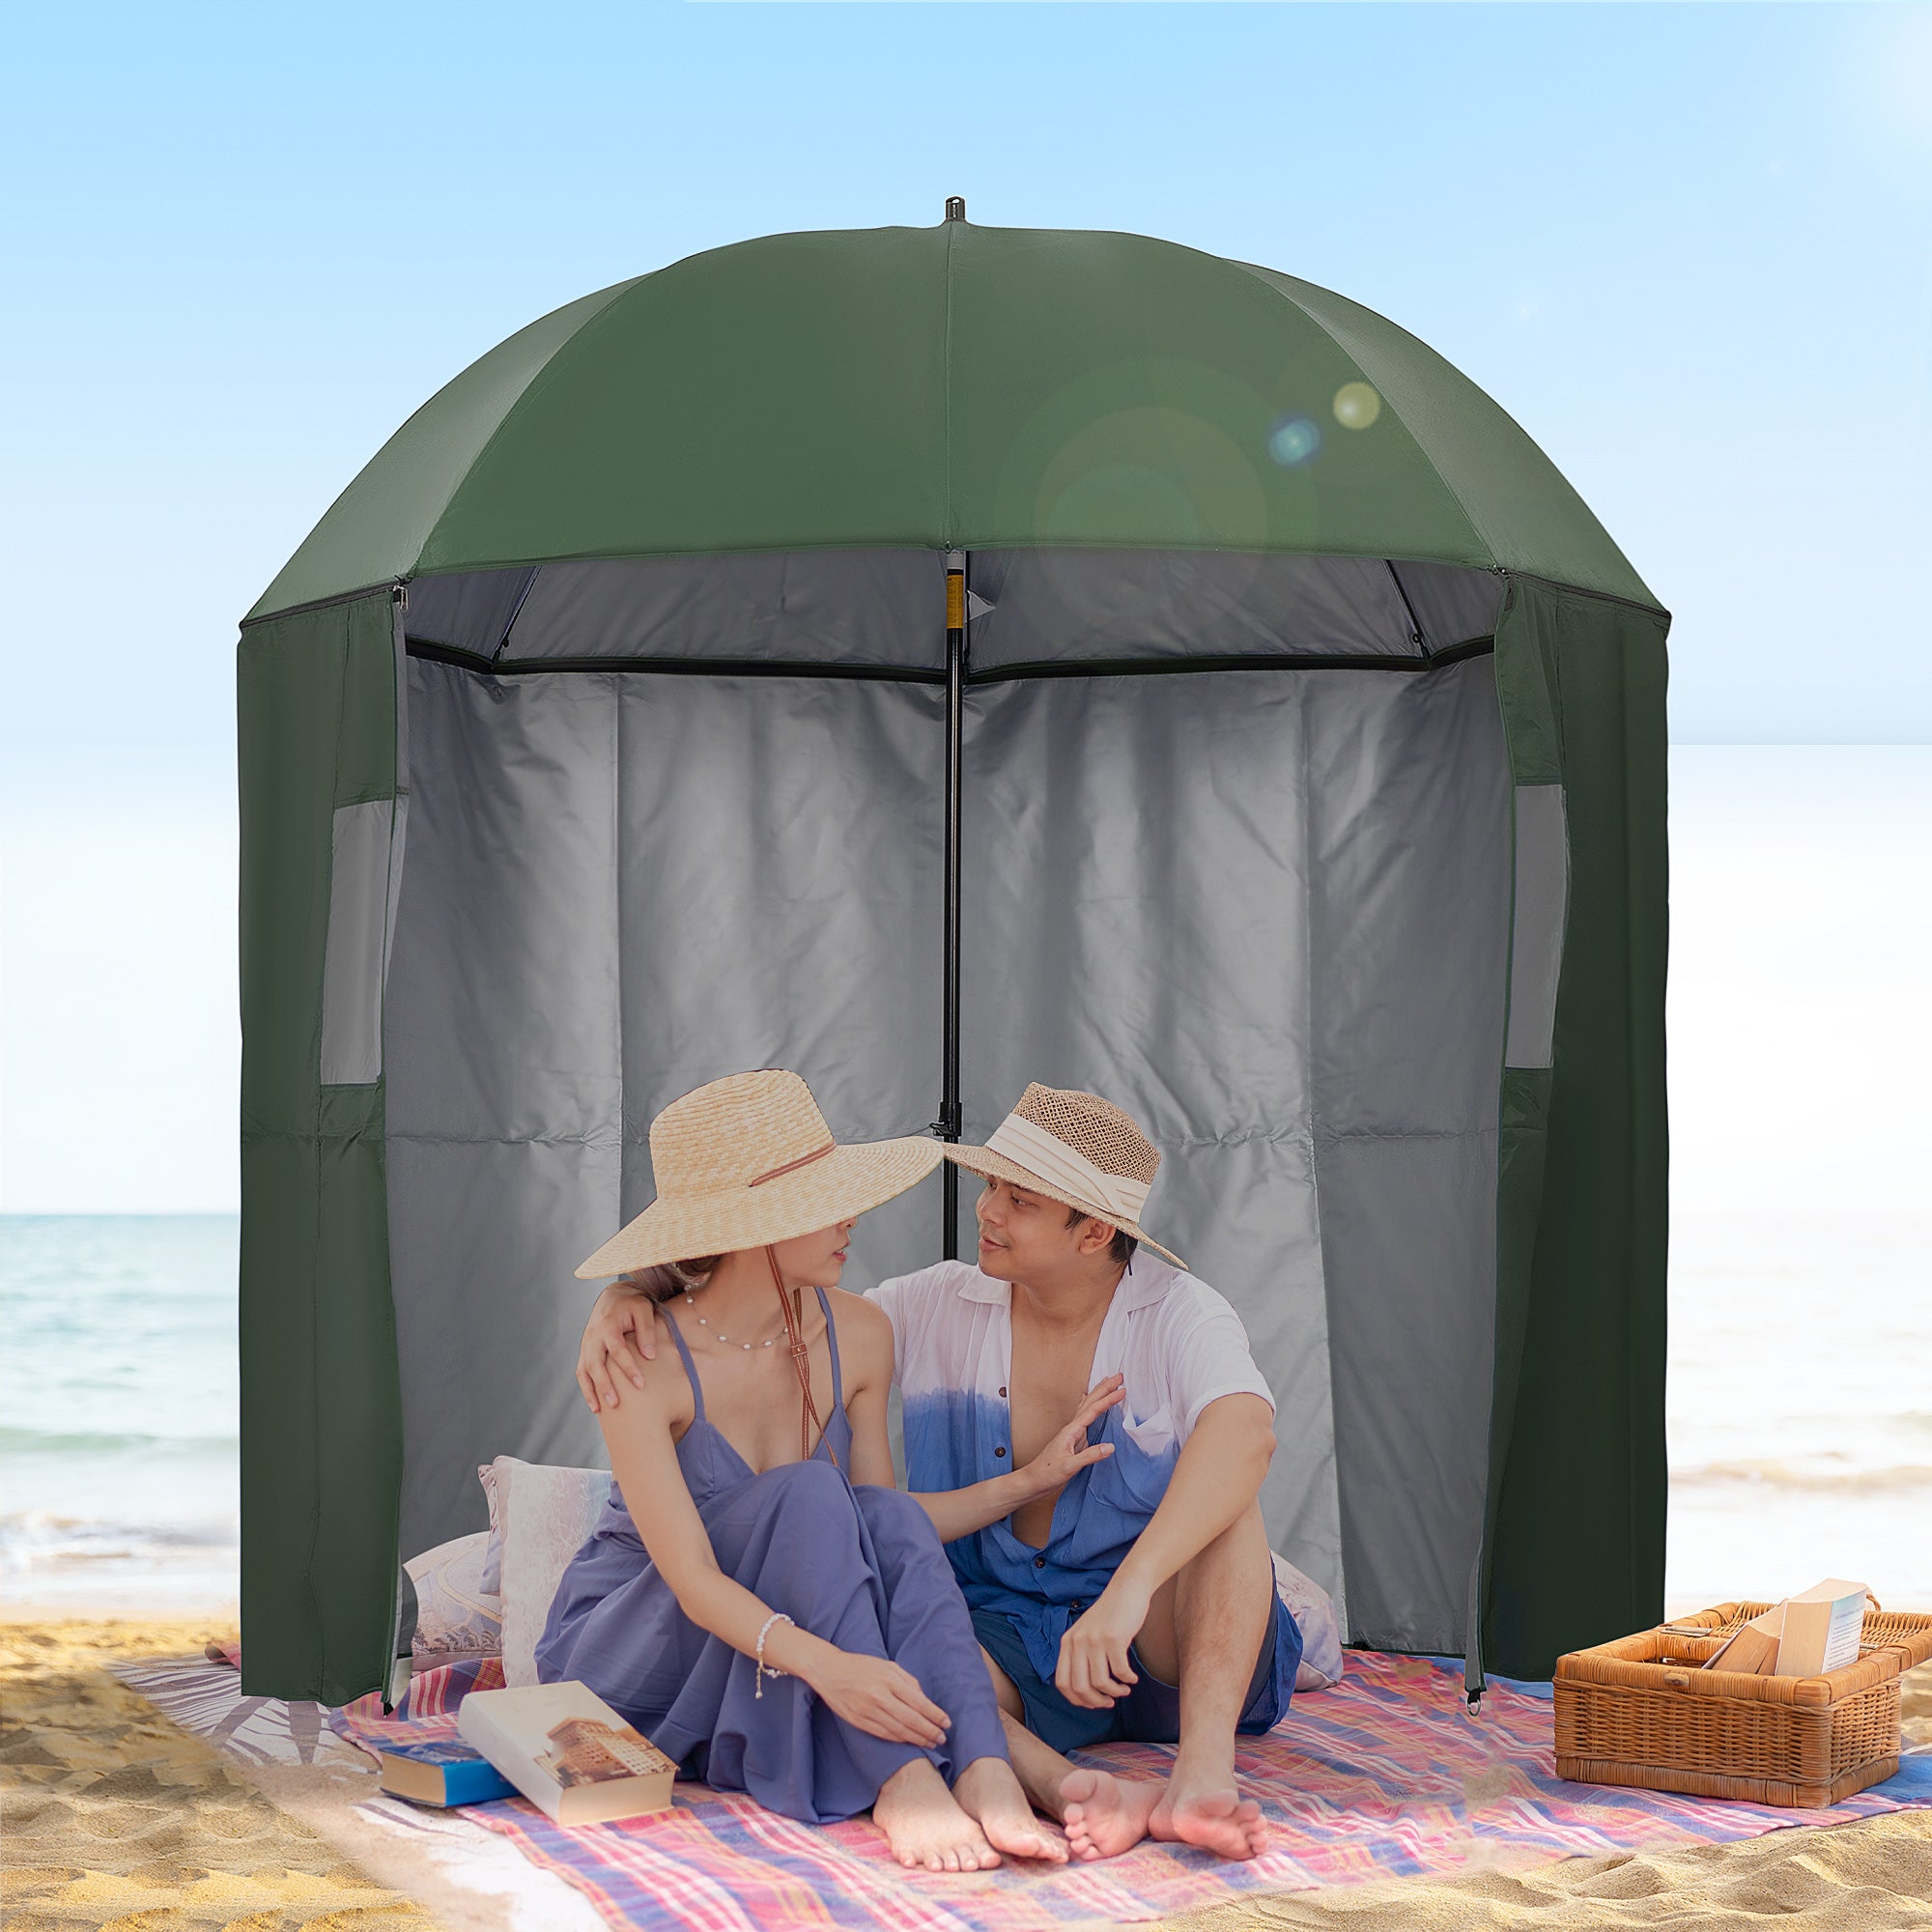 Outsunny 2m Beach Parasol Fishing Umbrella Brolly with Sides and Push Botton Tilt Sun Shade Shelter with Carry Bag, UV30+, Green